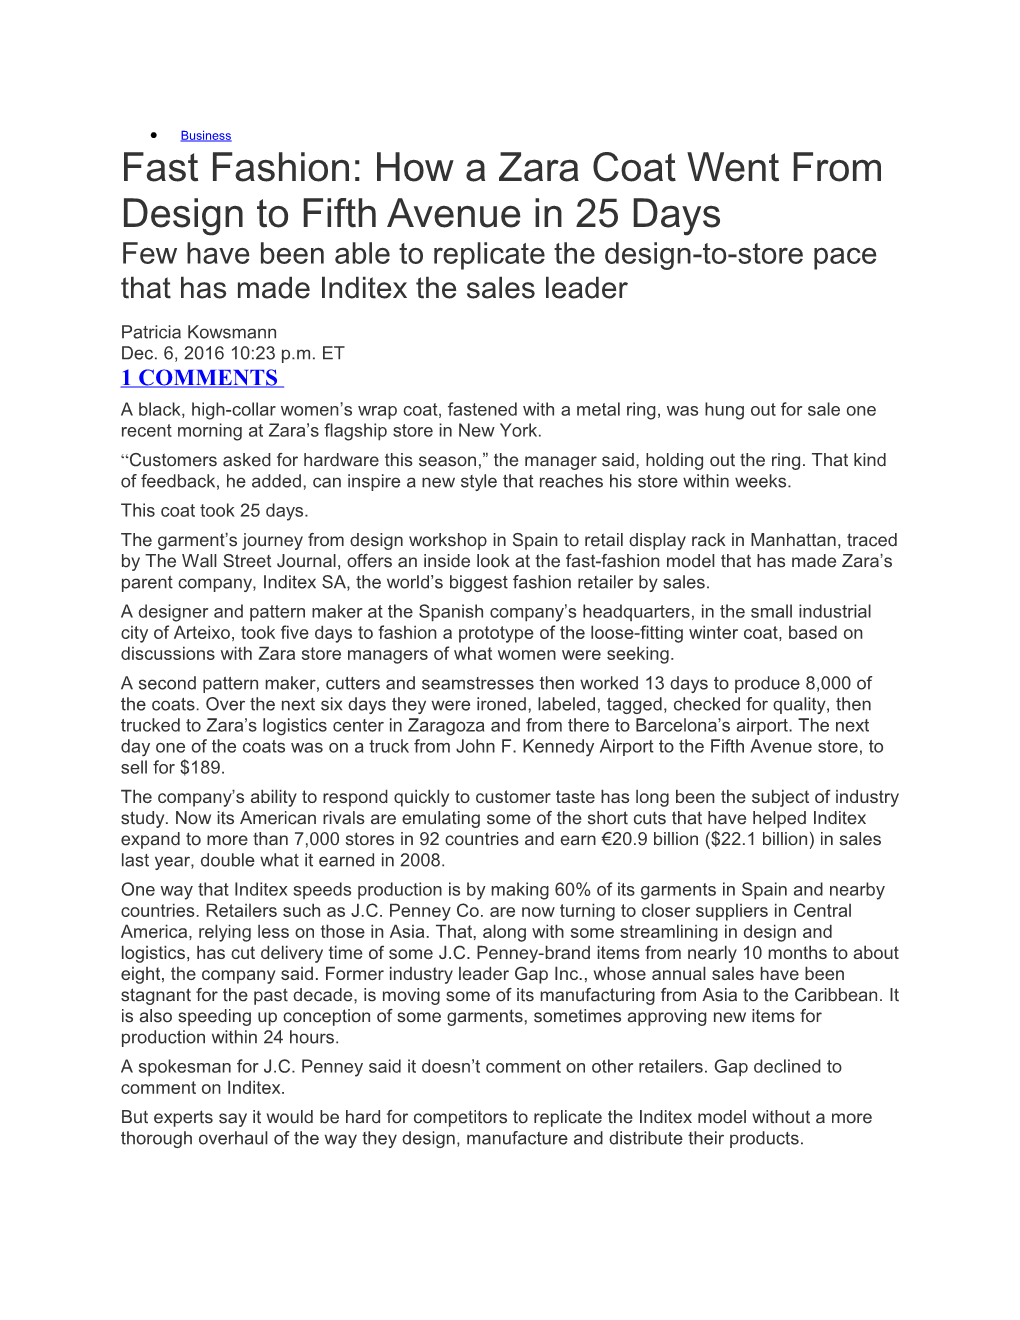 Fast Fashion: How a Zara Coat Went from Design to Fifth Avenue in 25 Days